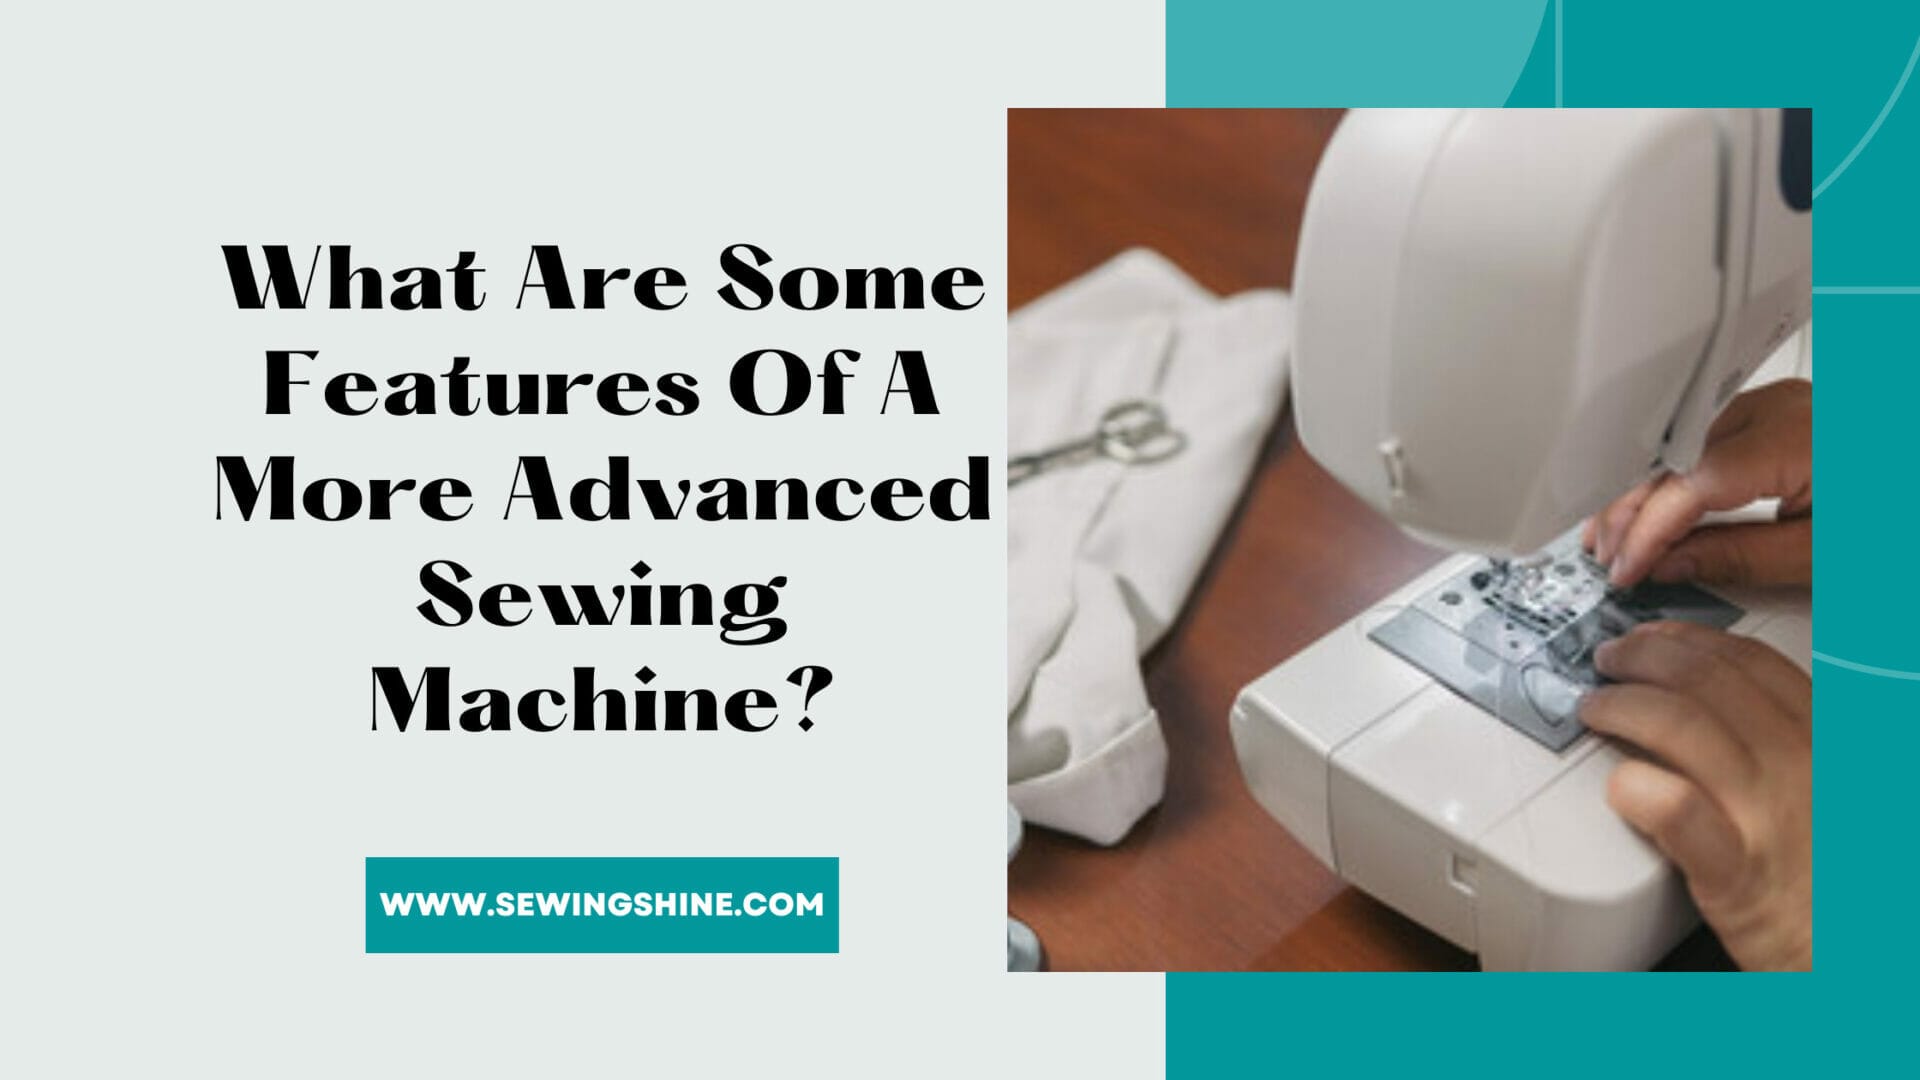 What Are Some Features Of A More Advanced Sewing Machine